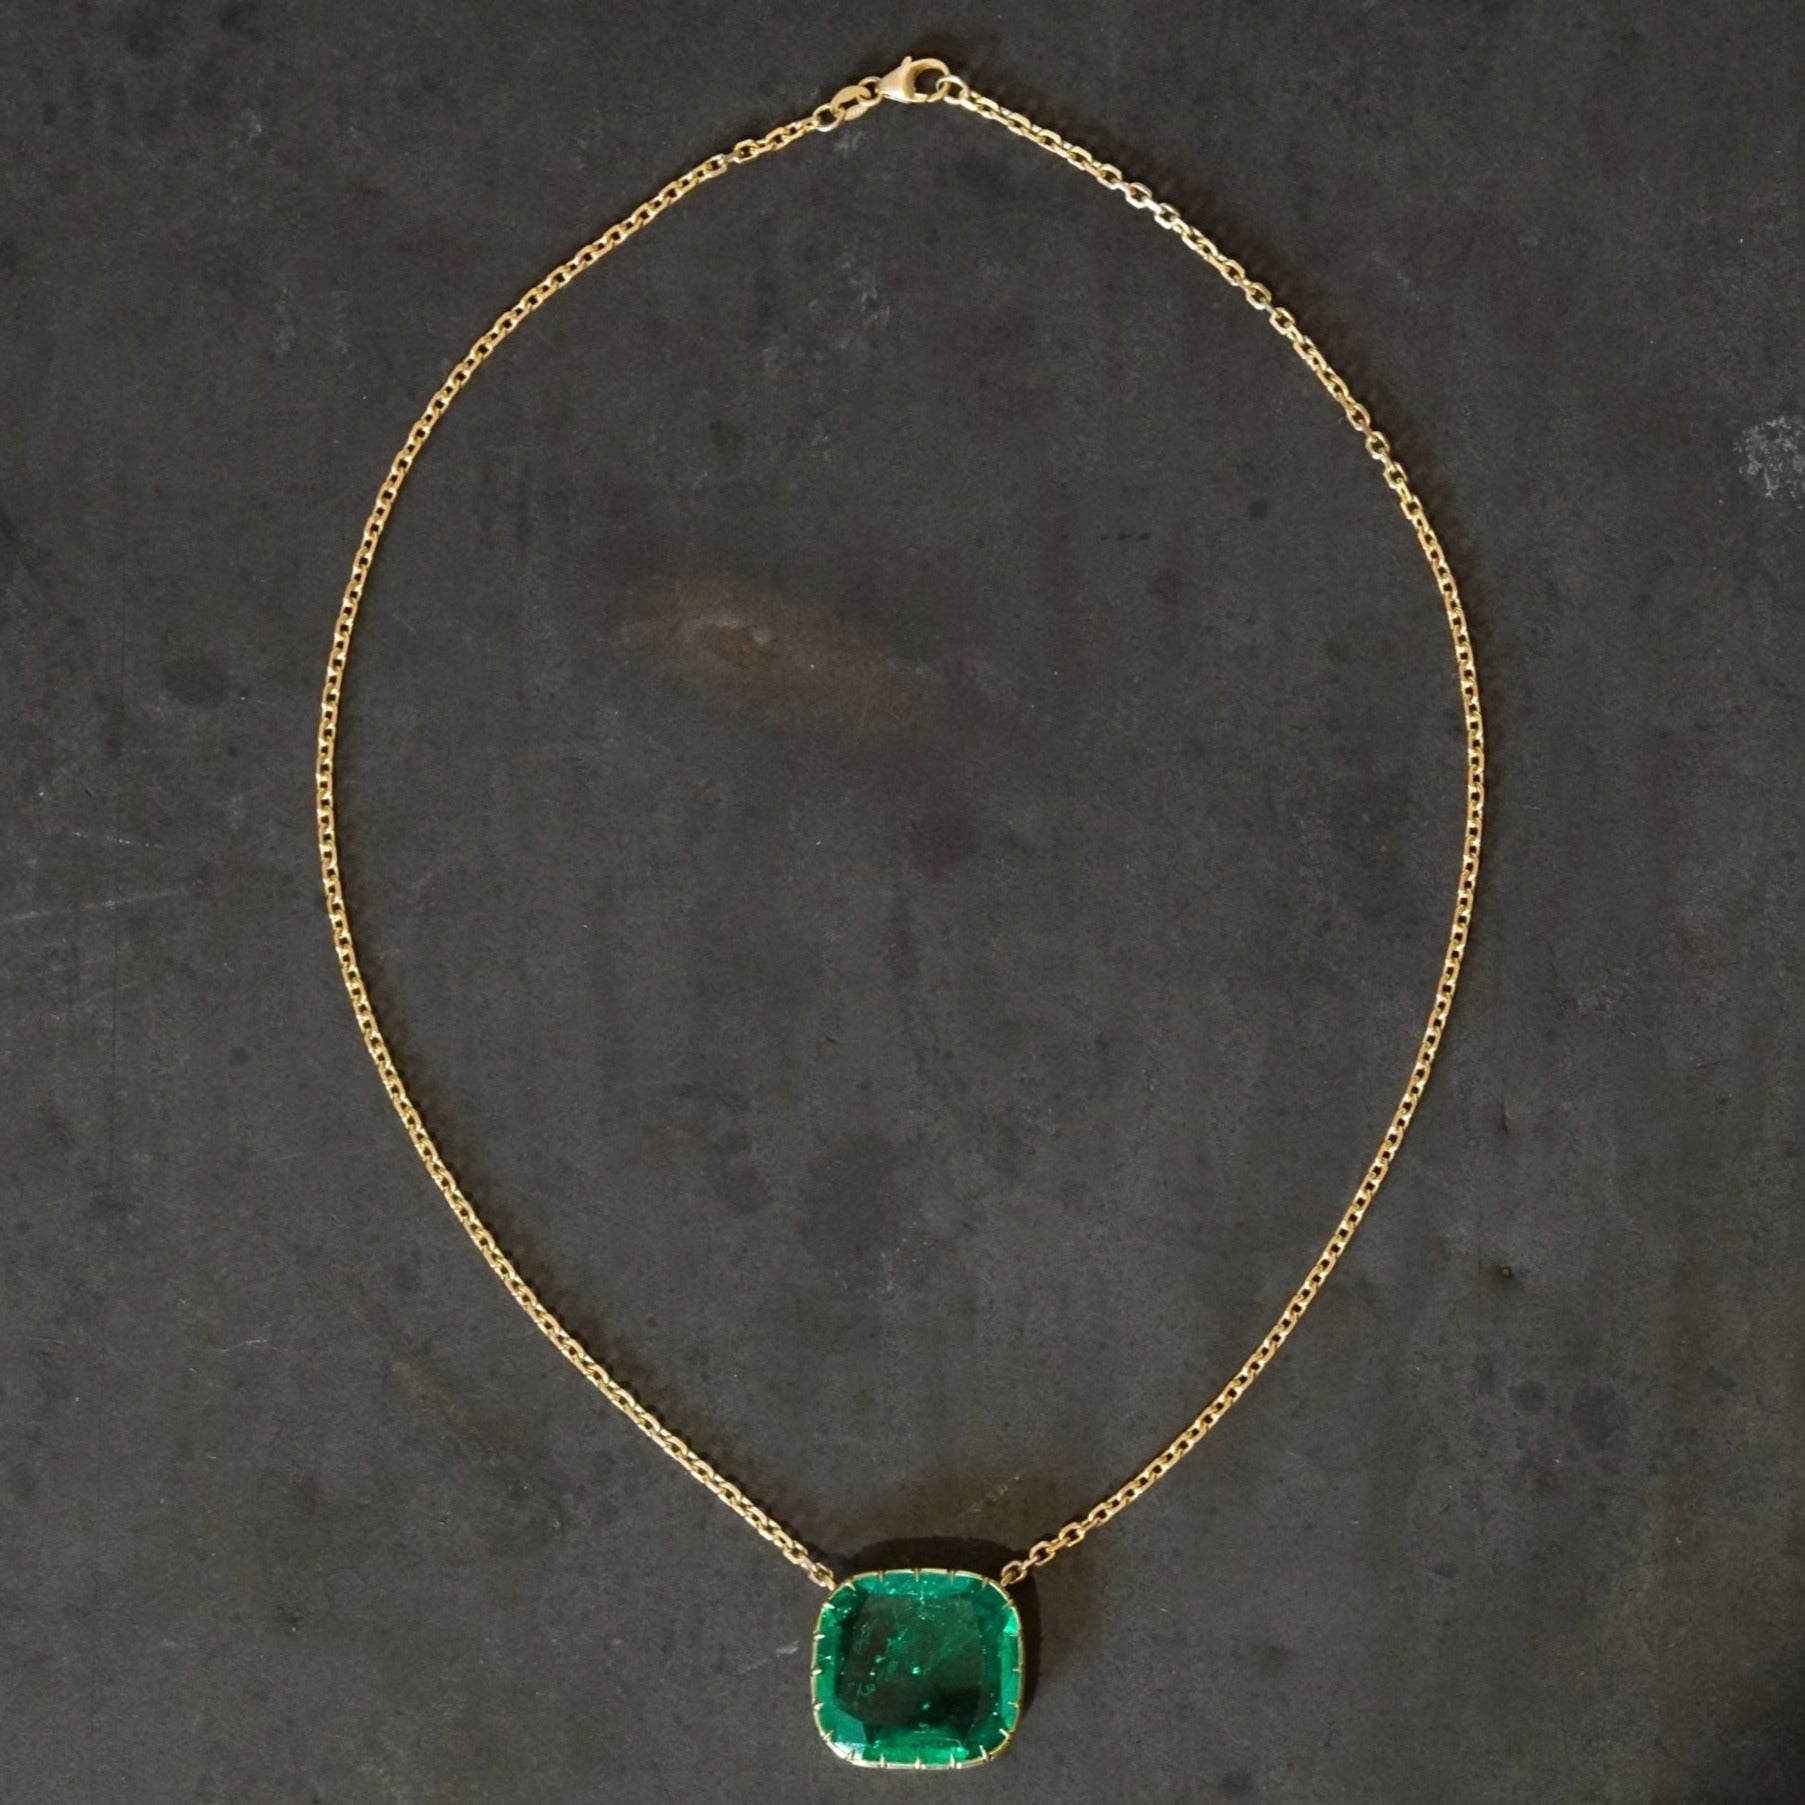 Victorian-Inspired 22.36 Carat Cushion Cut Colombian Emerald Necklace in 20K Gold